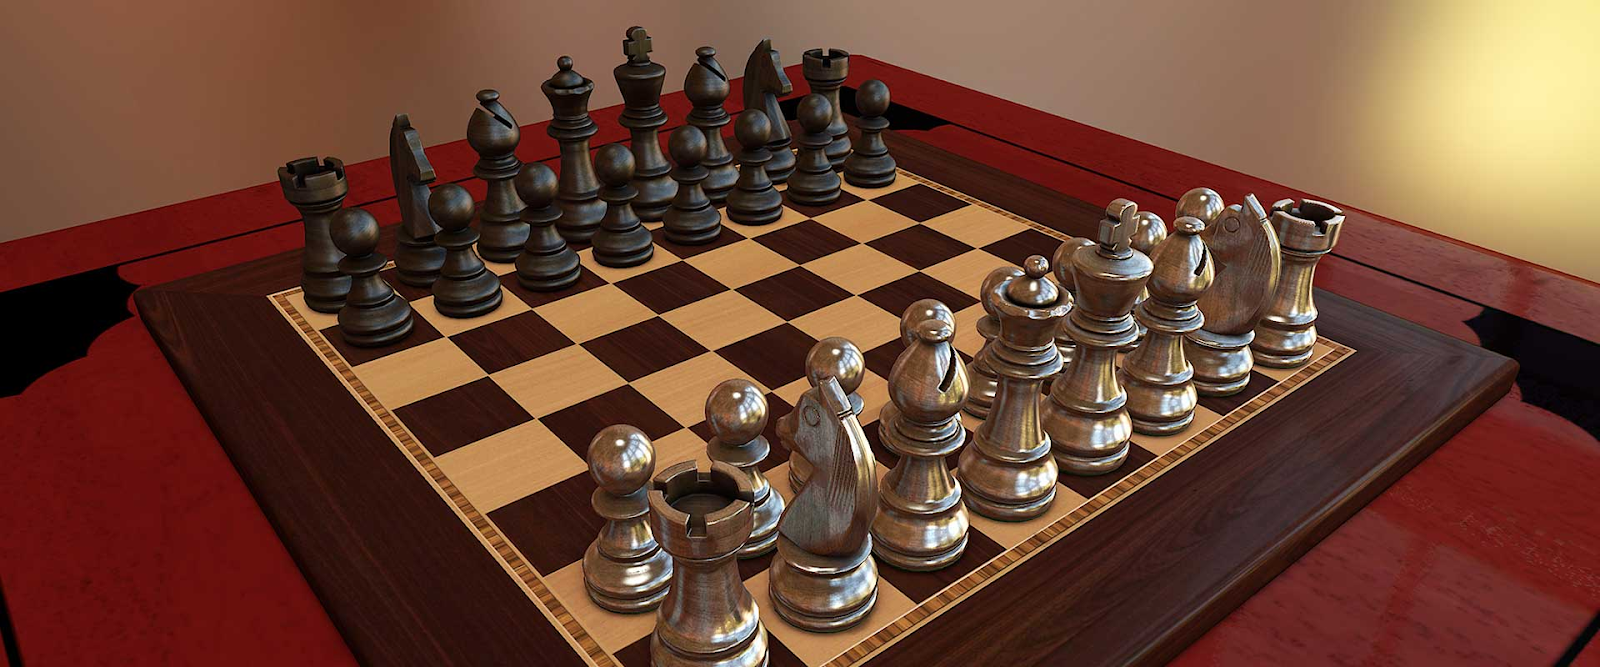 Chess in 3D online
